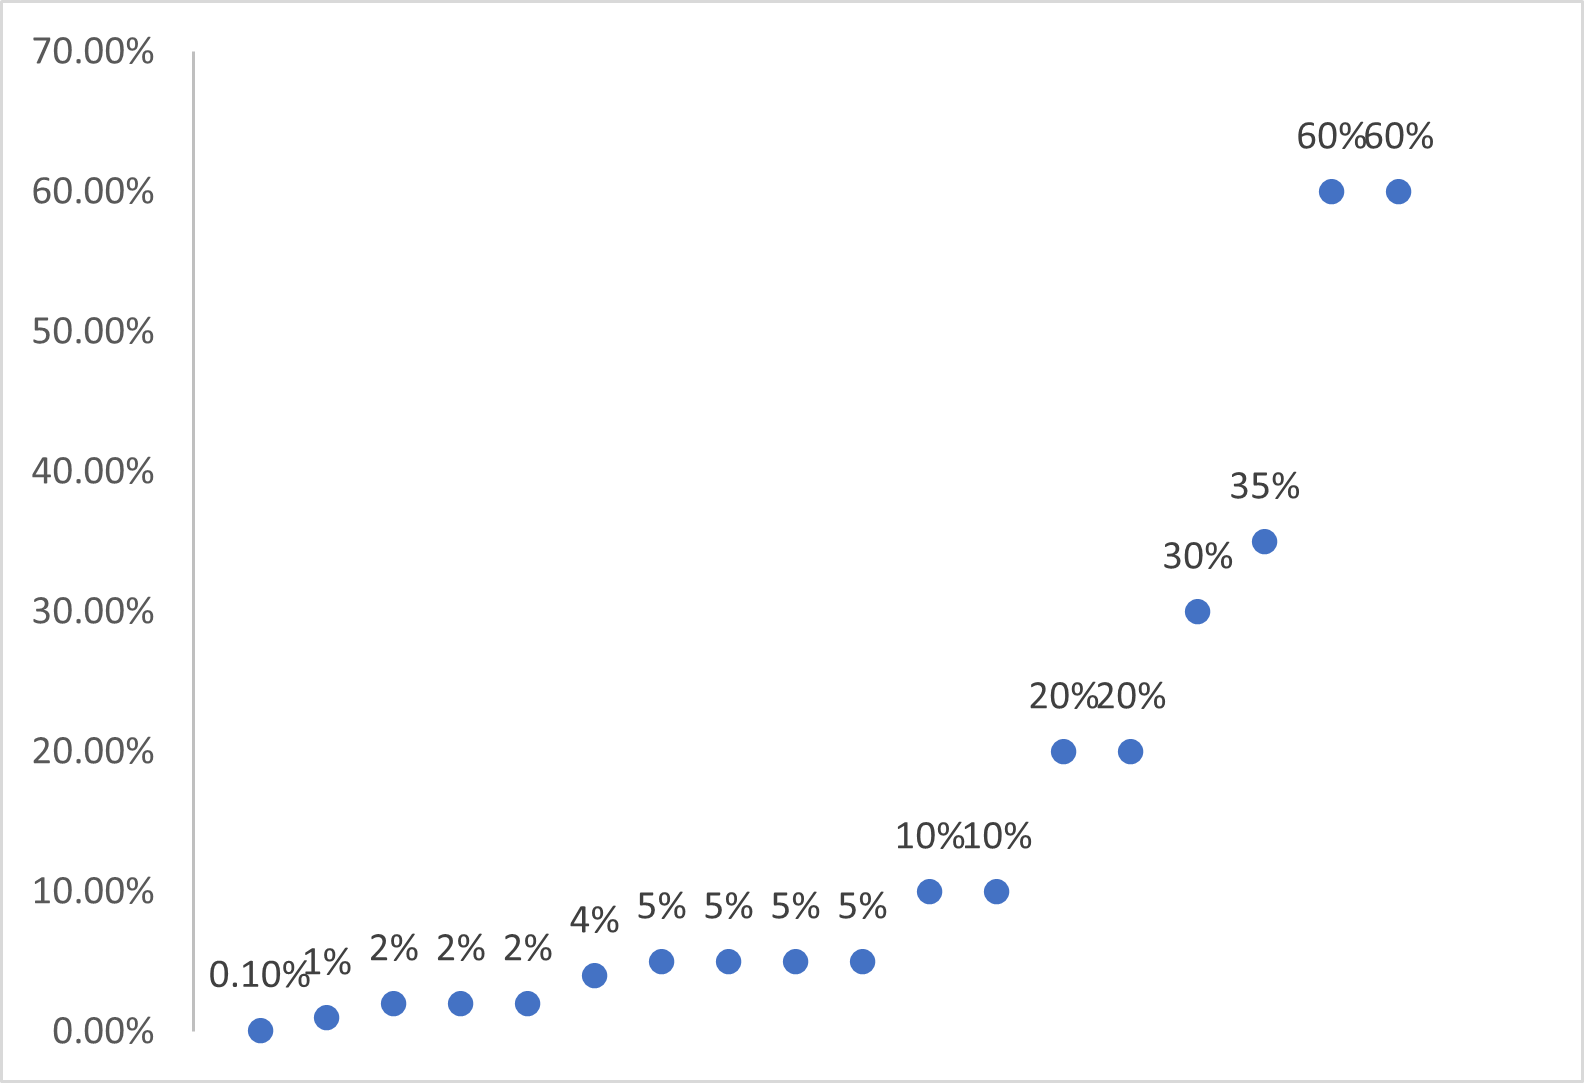 Scatter plot showing number of producers by what percentage of sales went to schools, ranging from 0.1% to 60%